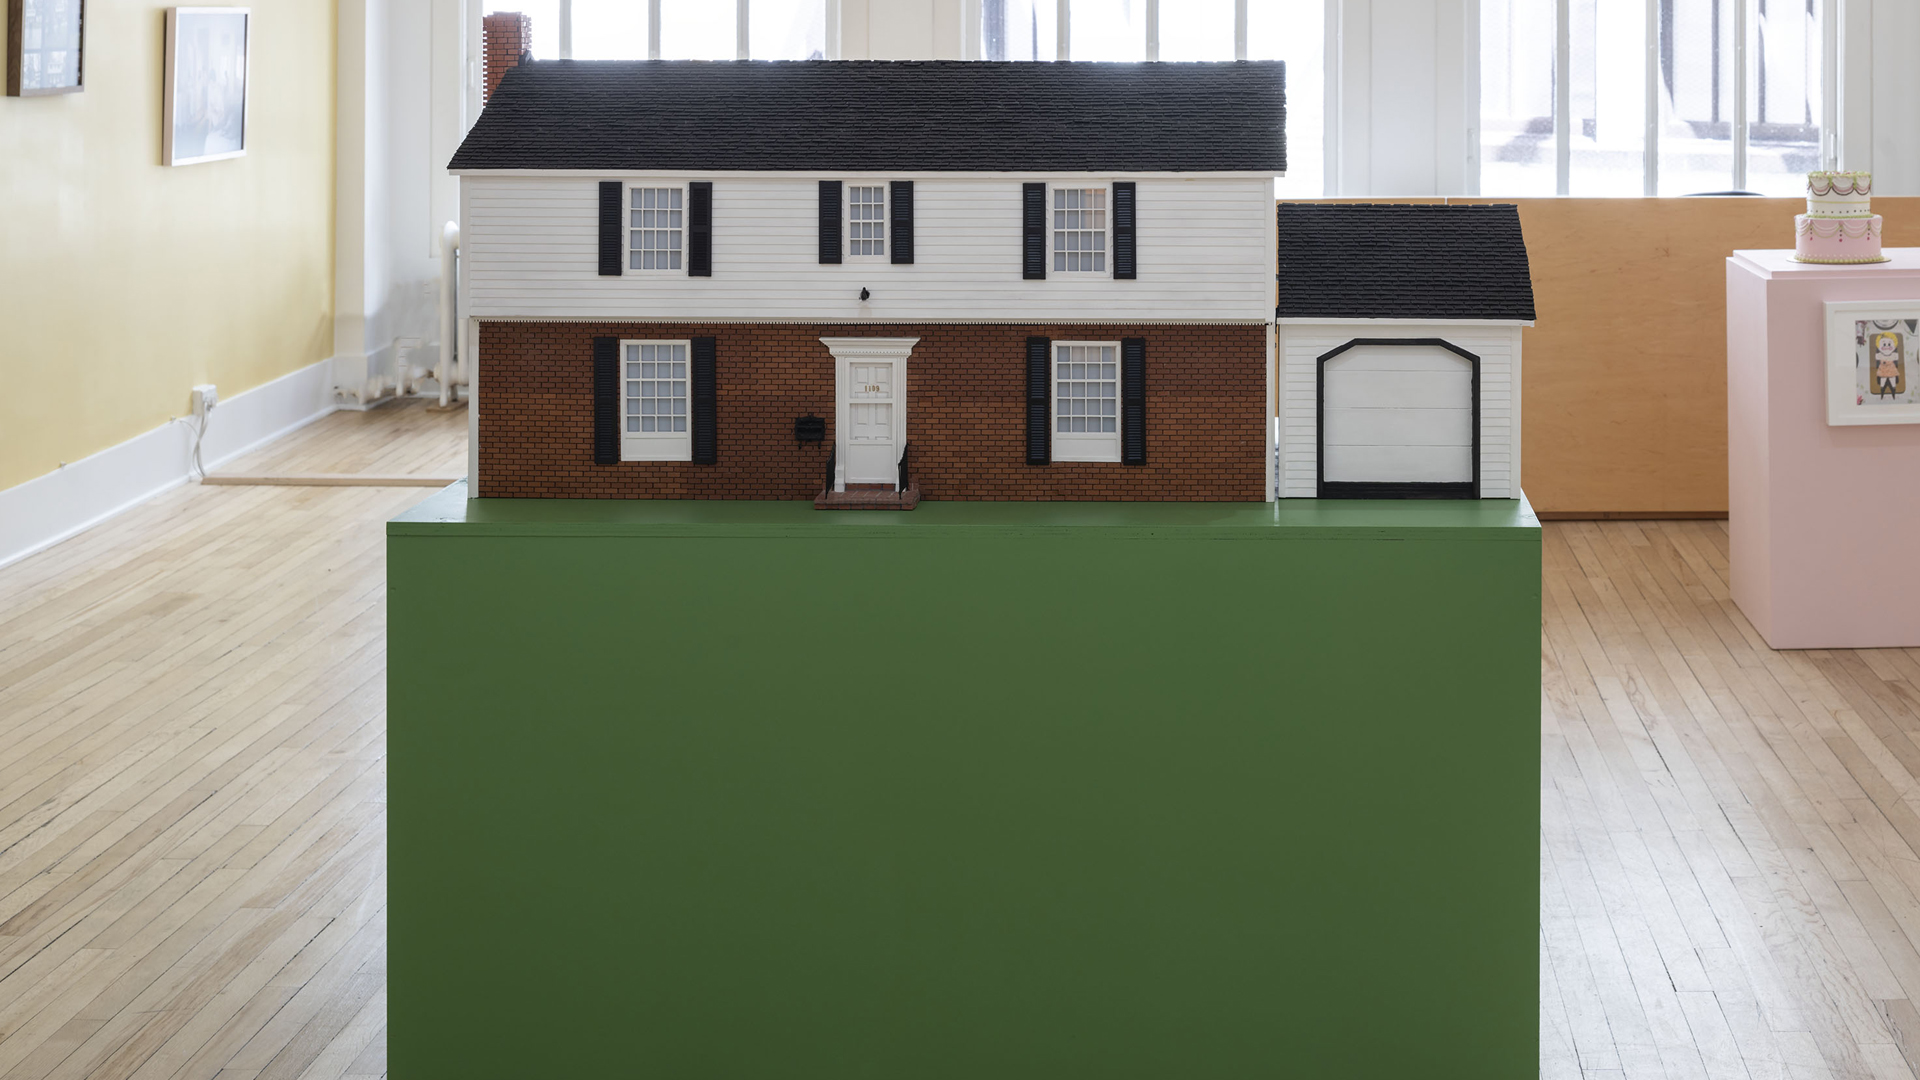 Two-story colonial house with garage as a scale model on a green pedestal